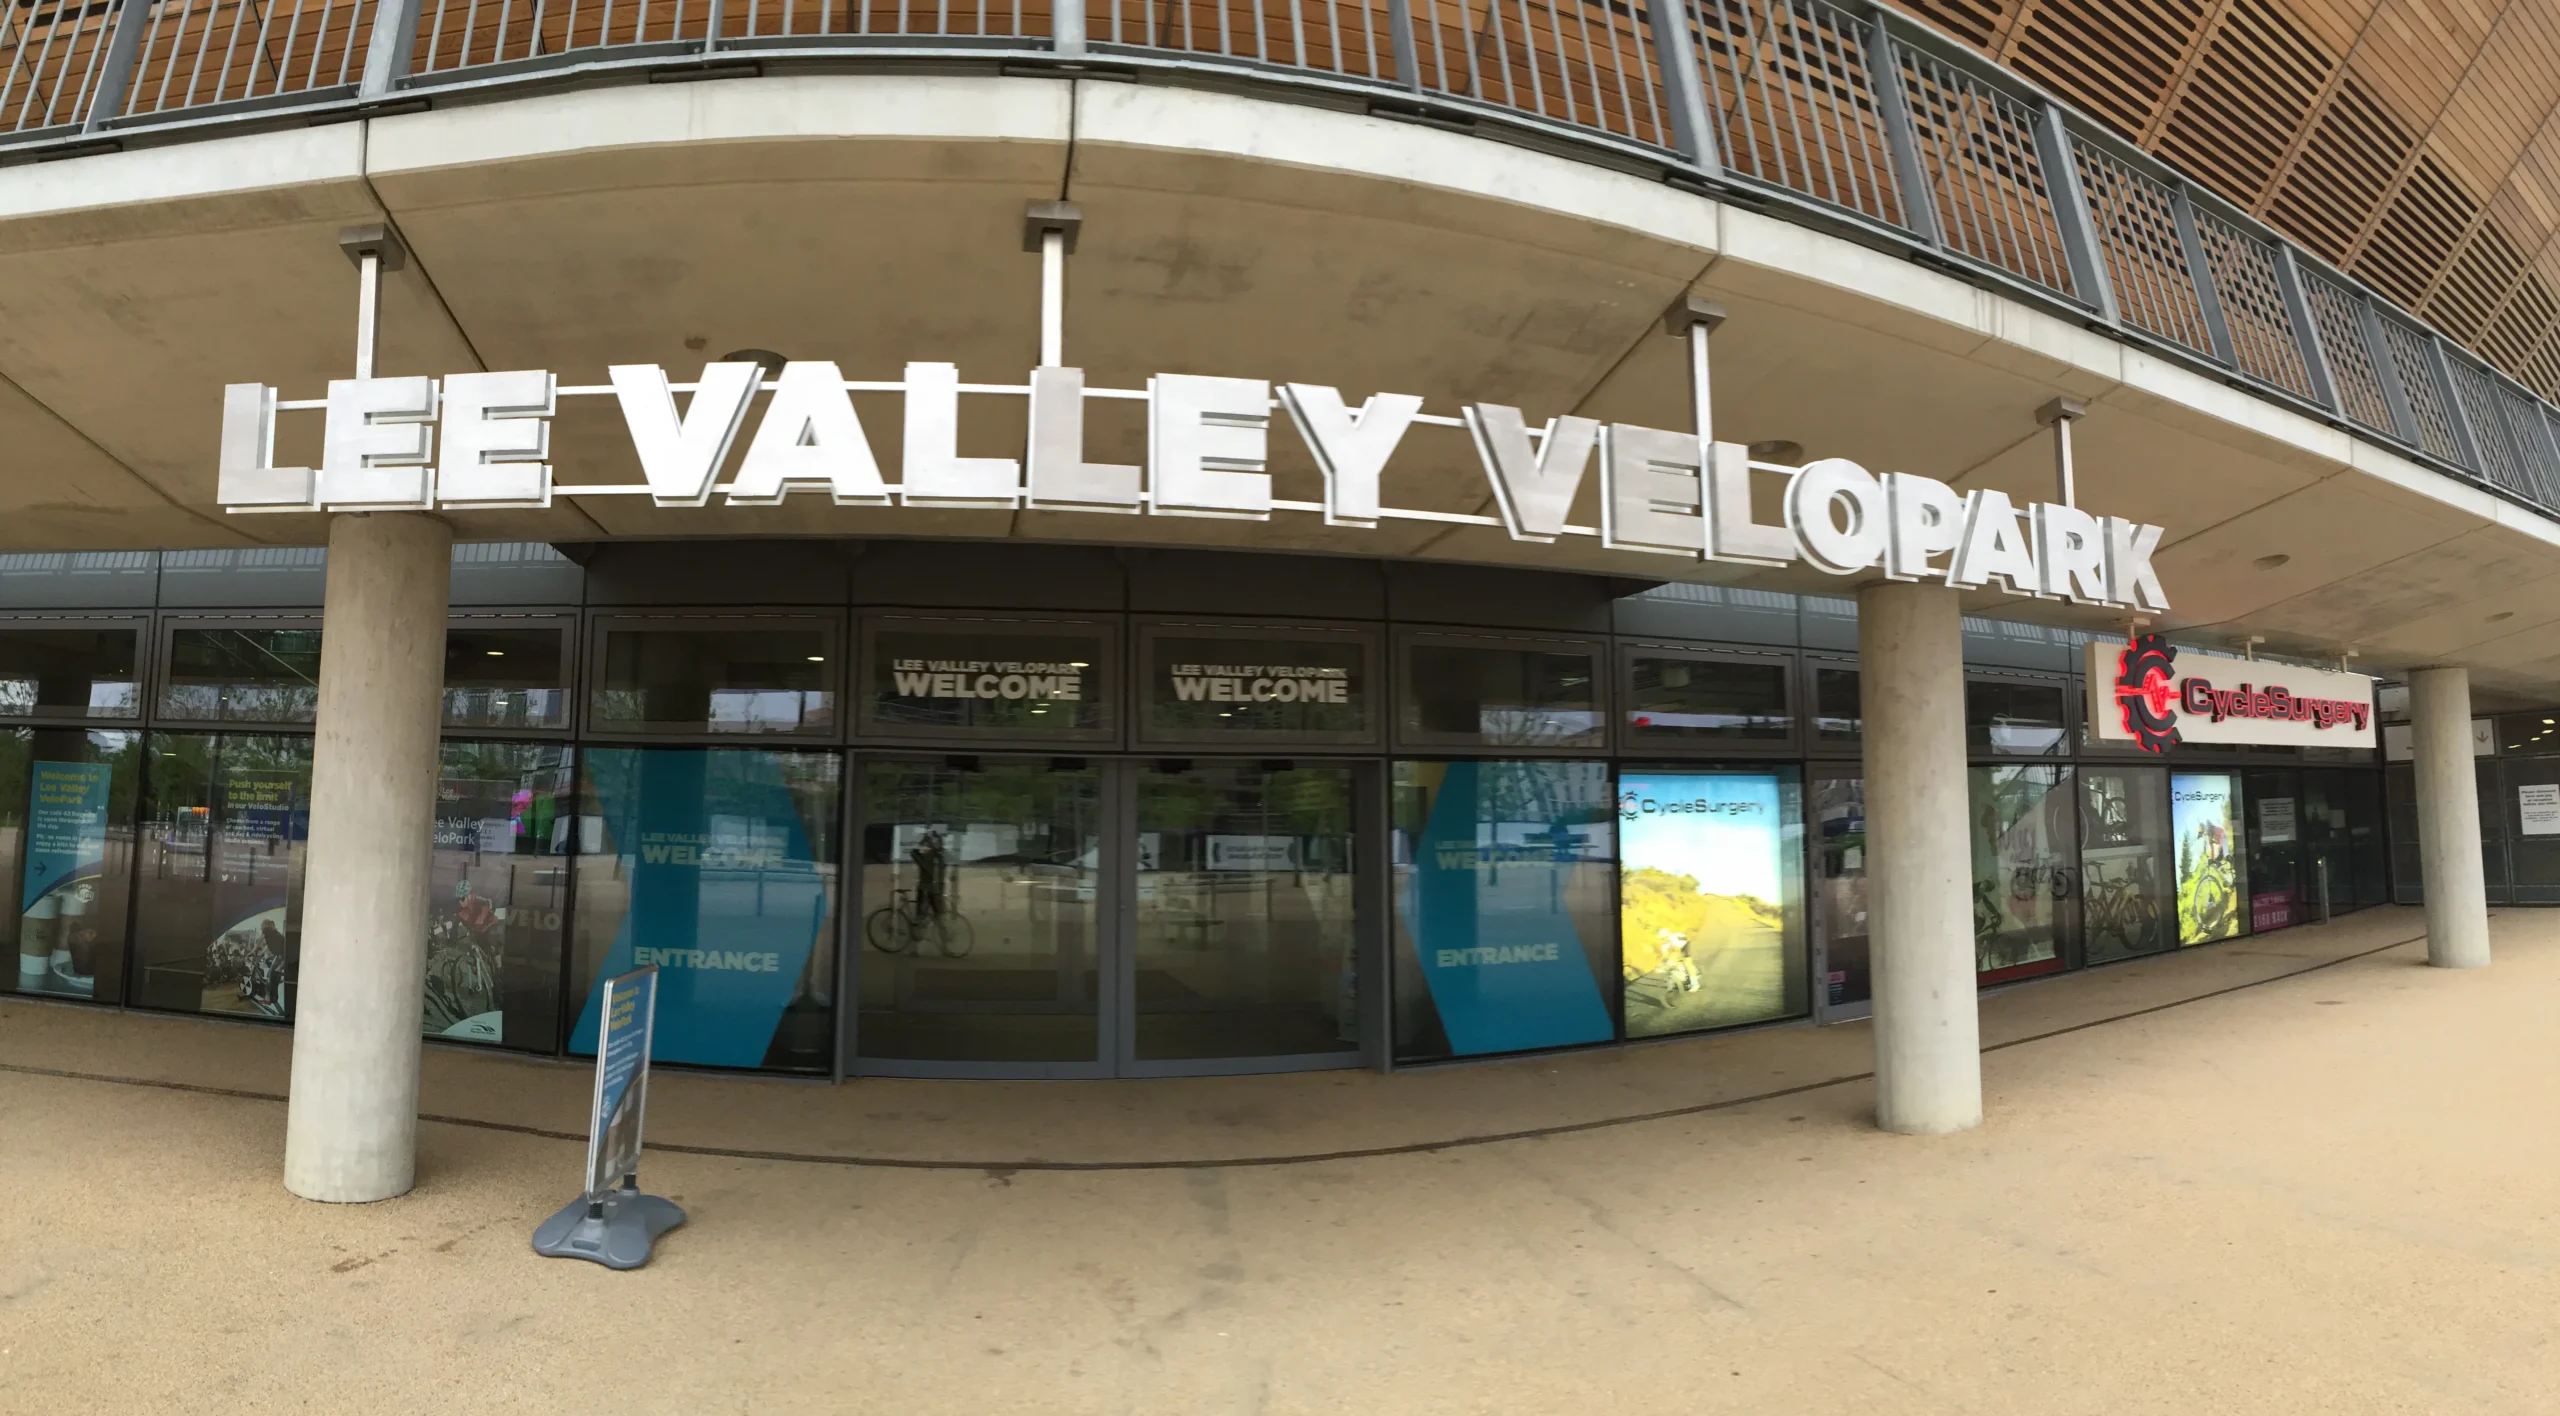 The entrance to the Lee Valley Olympic Velodrome in London